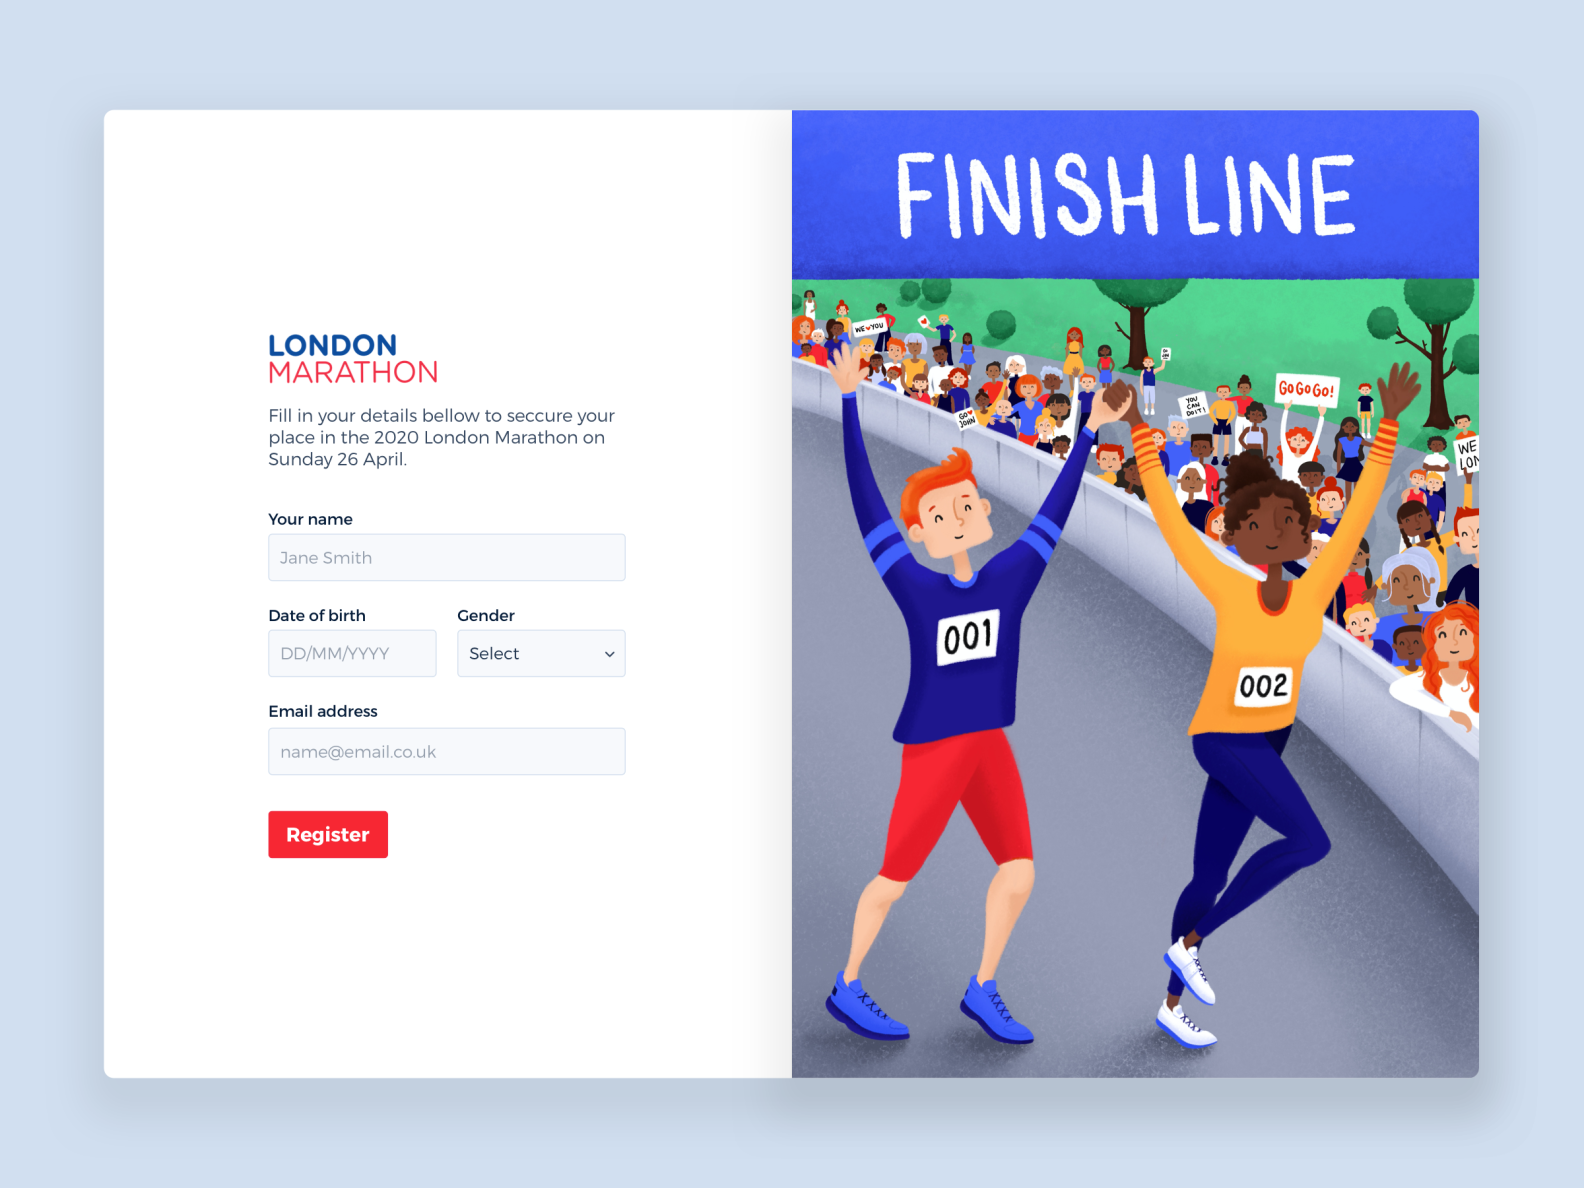 Sign up form for the London Marathon by Nicole Bettina Bartlett on Dribbble